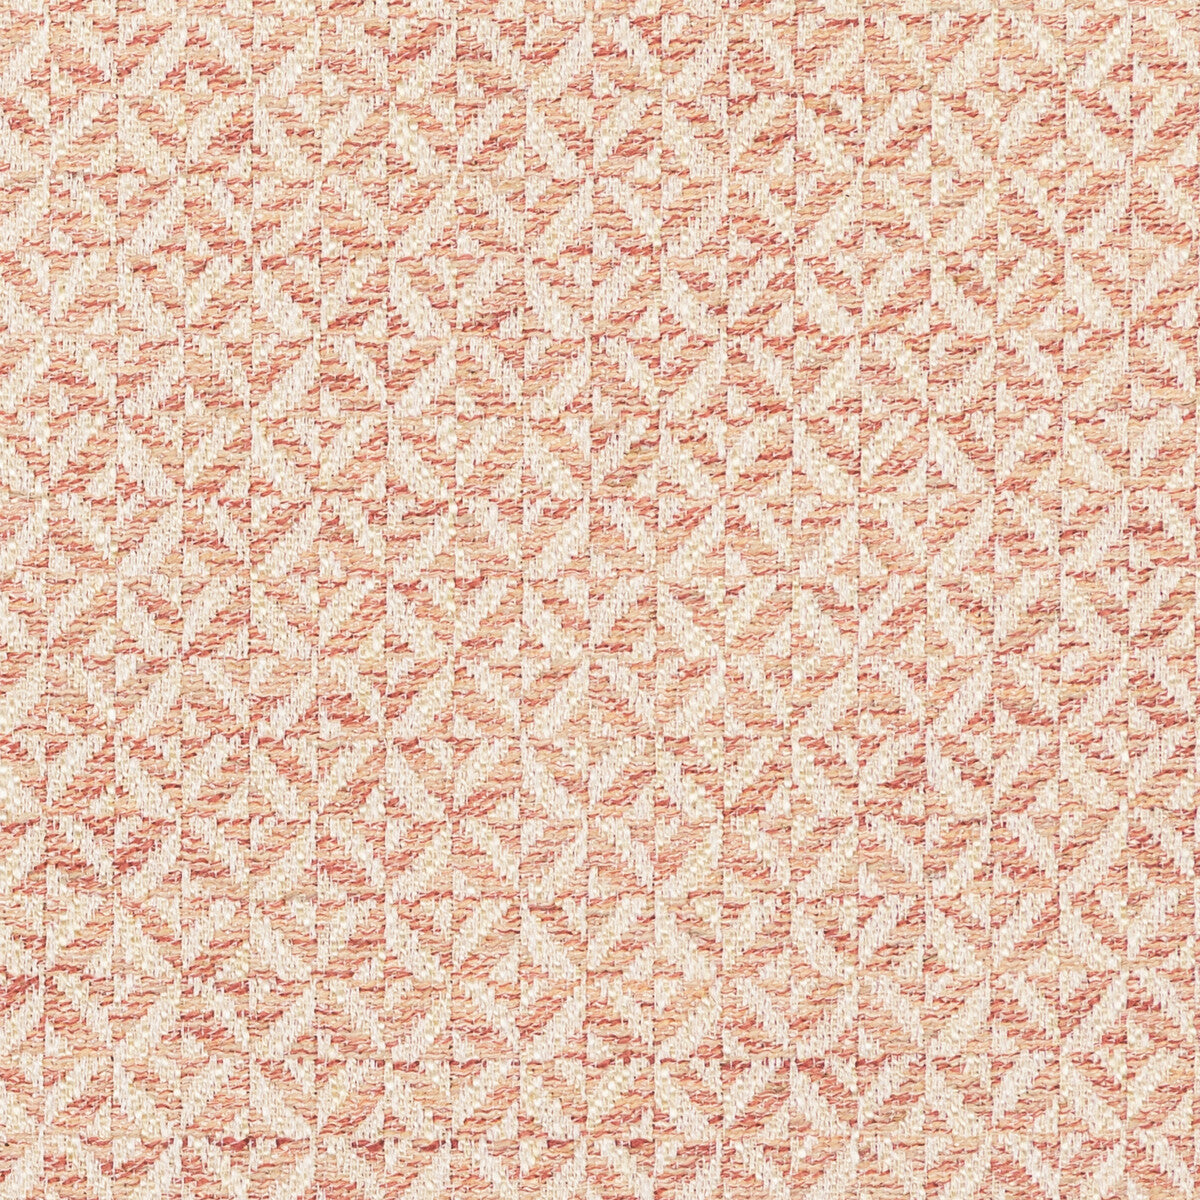 Triana Weave fabric in petal color - pattern 2021105.7.0 - by Lee Jofa in the Triana Weaves collection